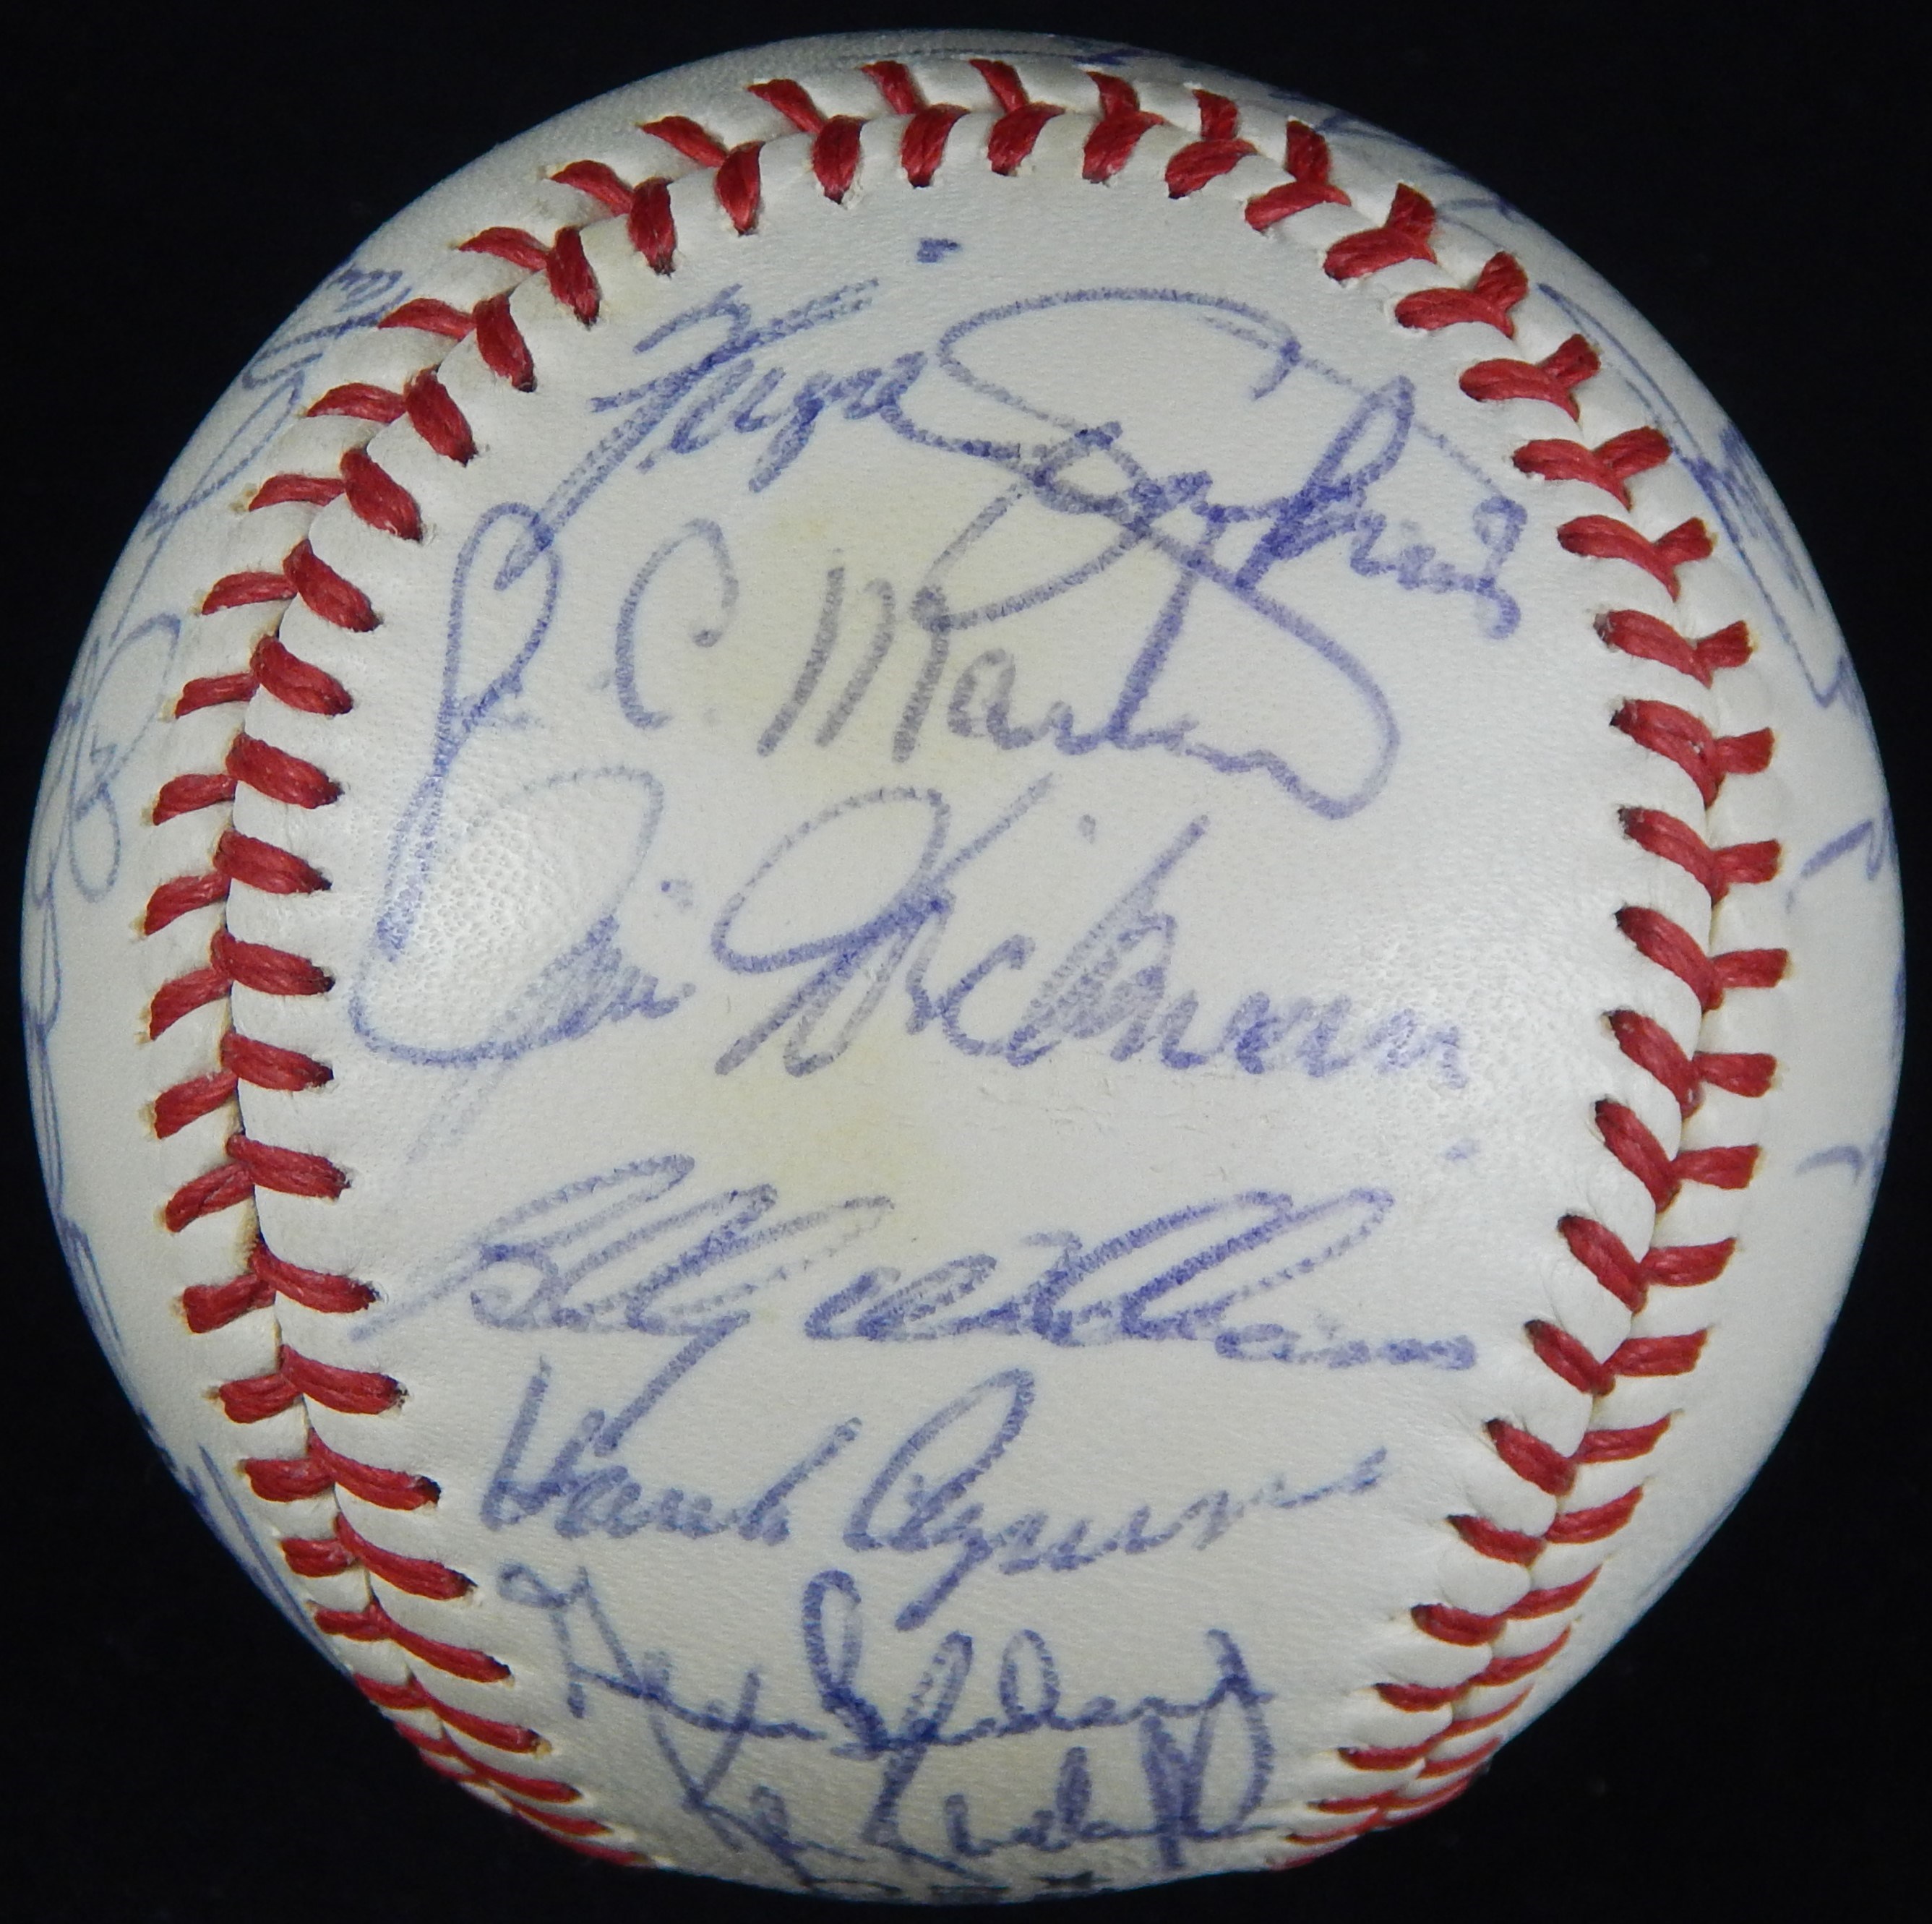 - 1973 Chicago Cubs Team Signed Baseball with 30 Signatures - JSA LOA